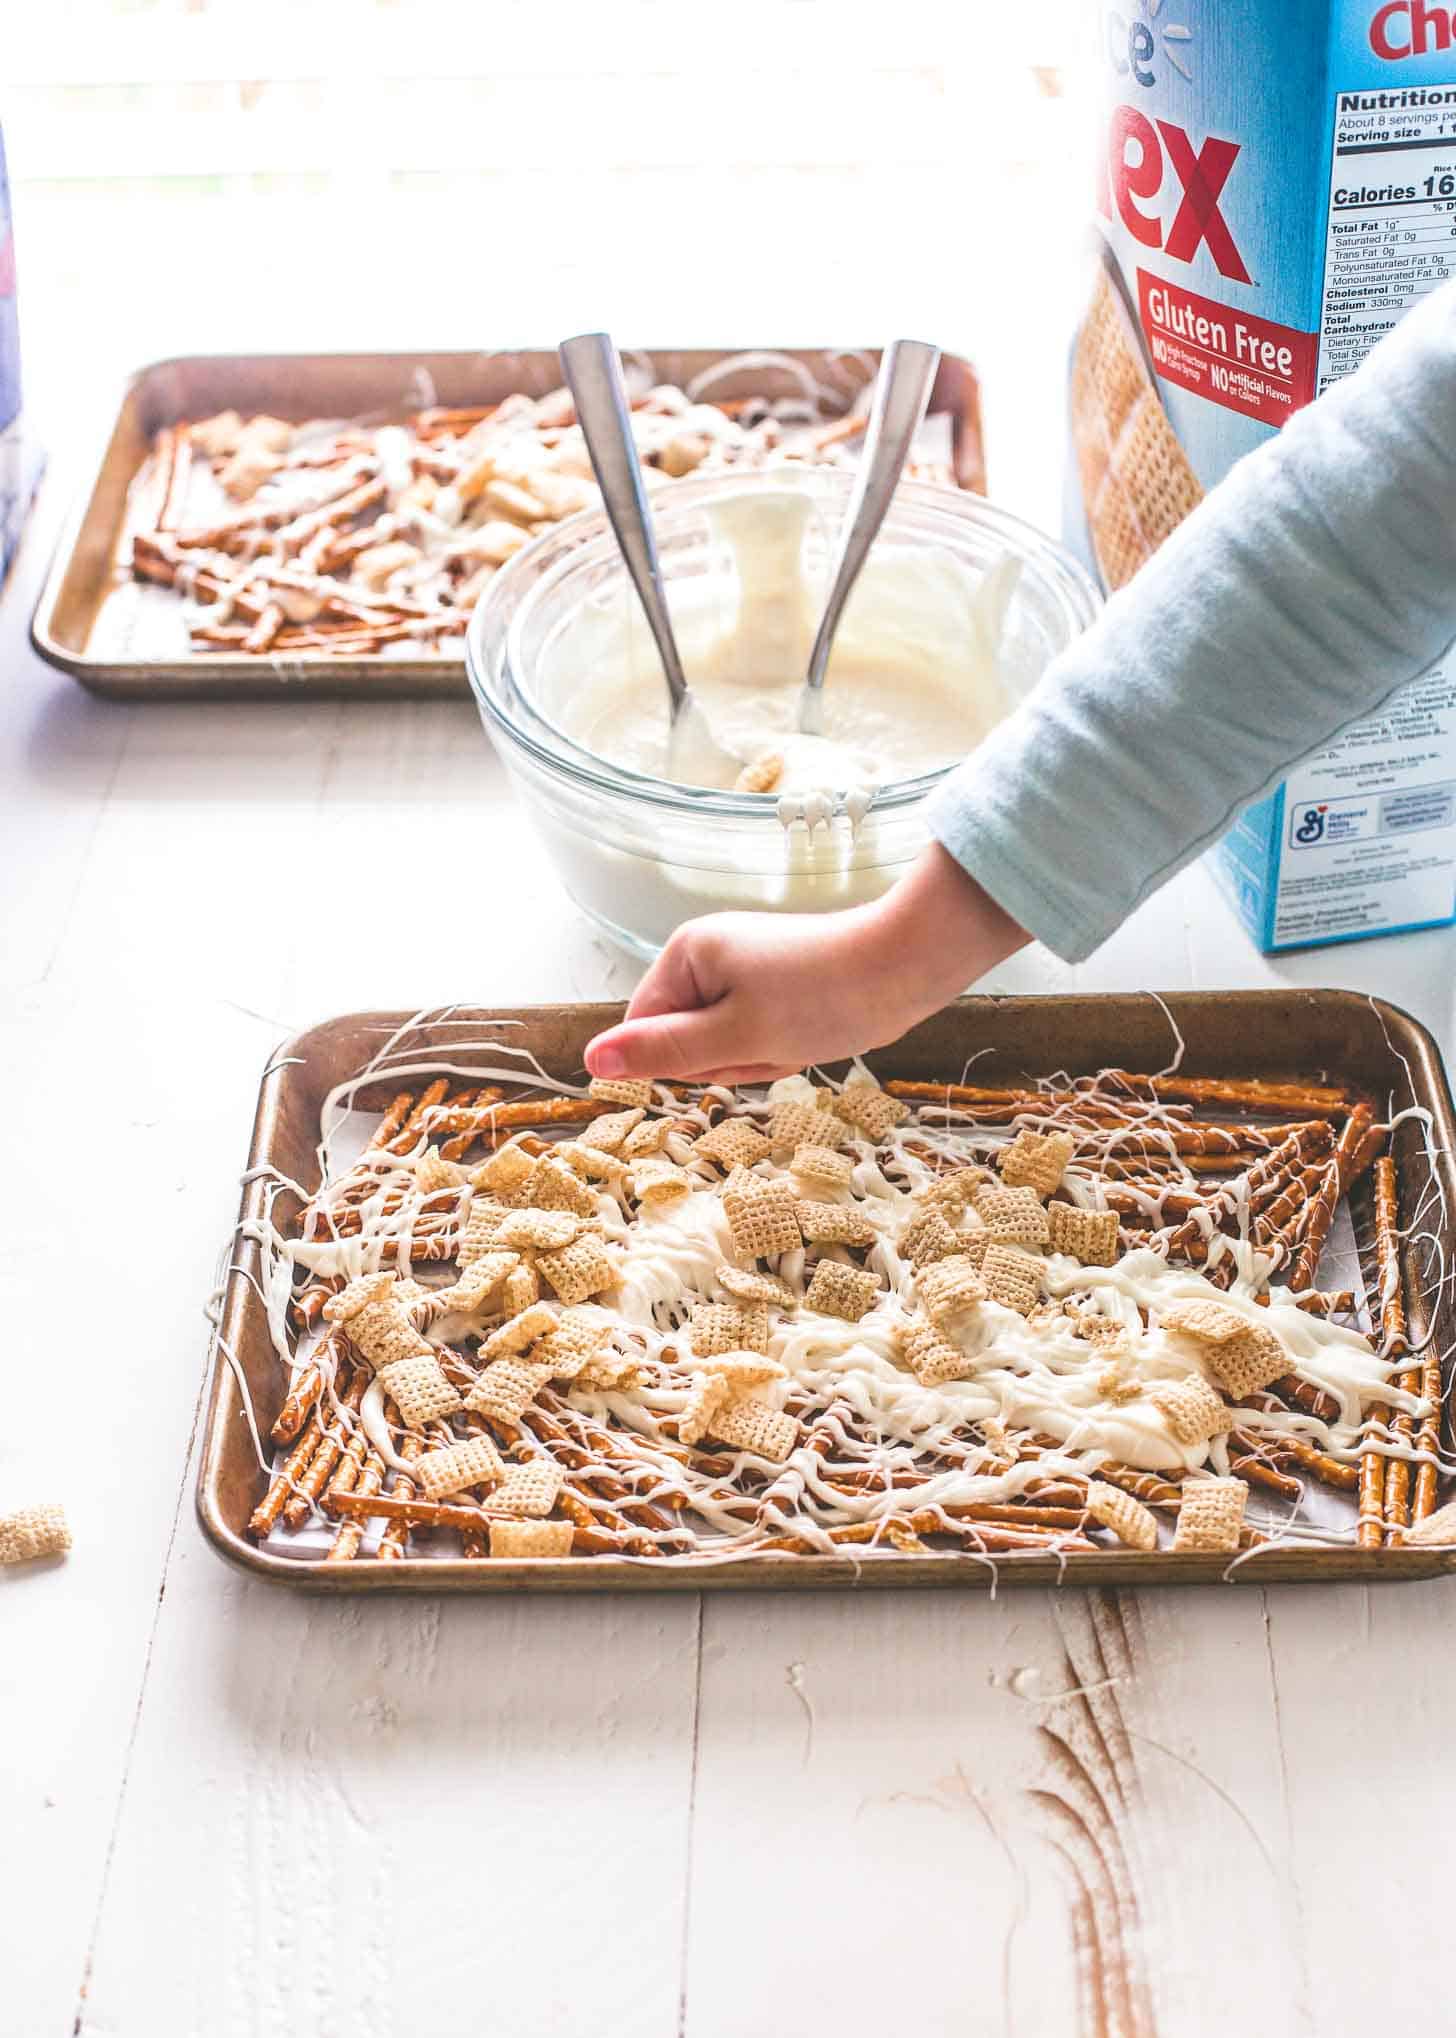 sprinkling chex cereal onto pretzels and almond bark on sheet pans